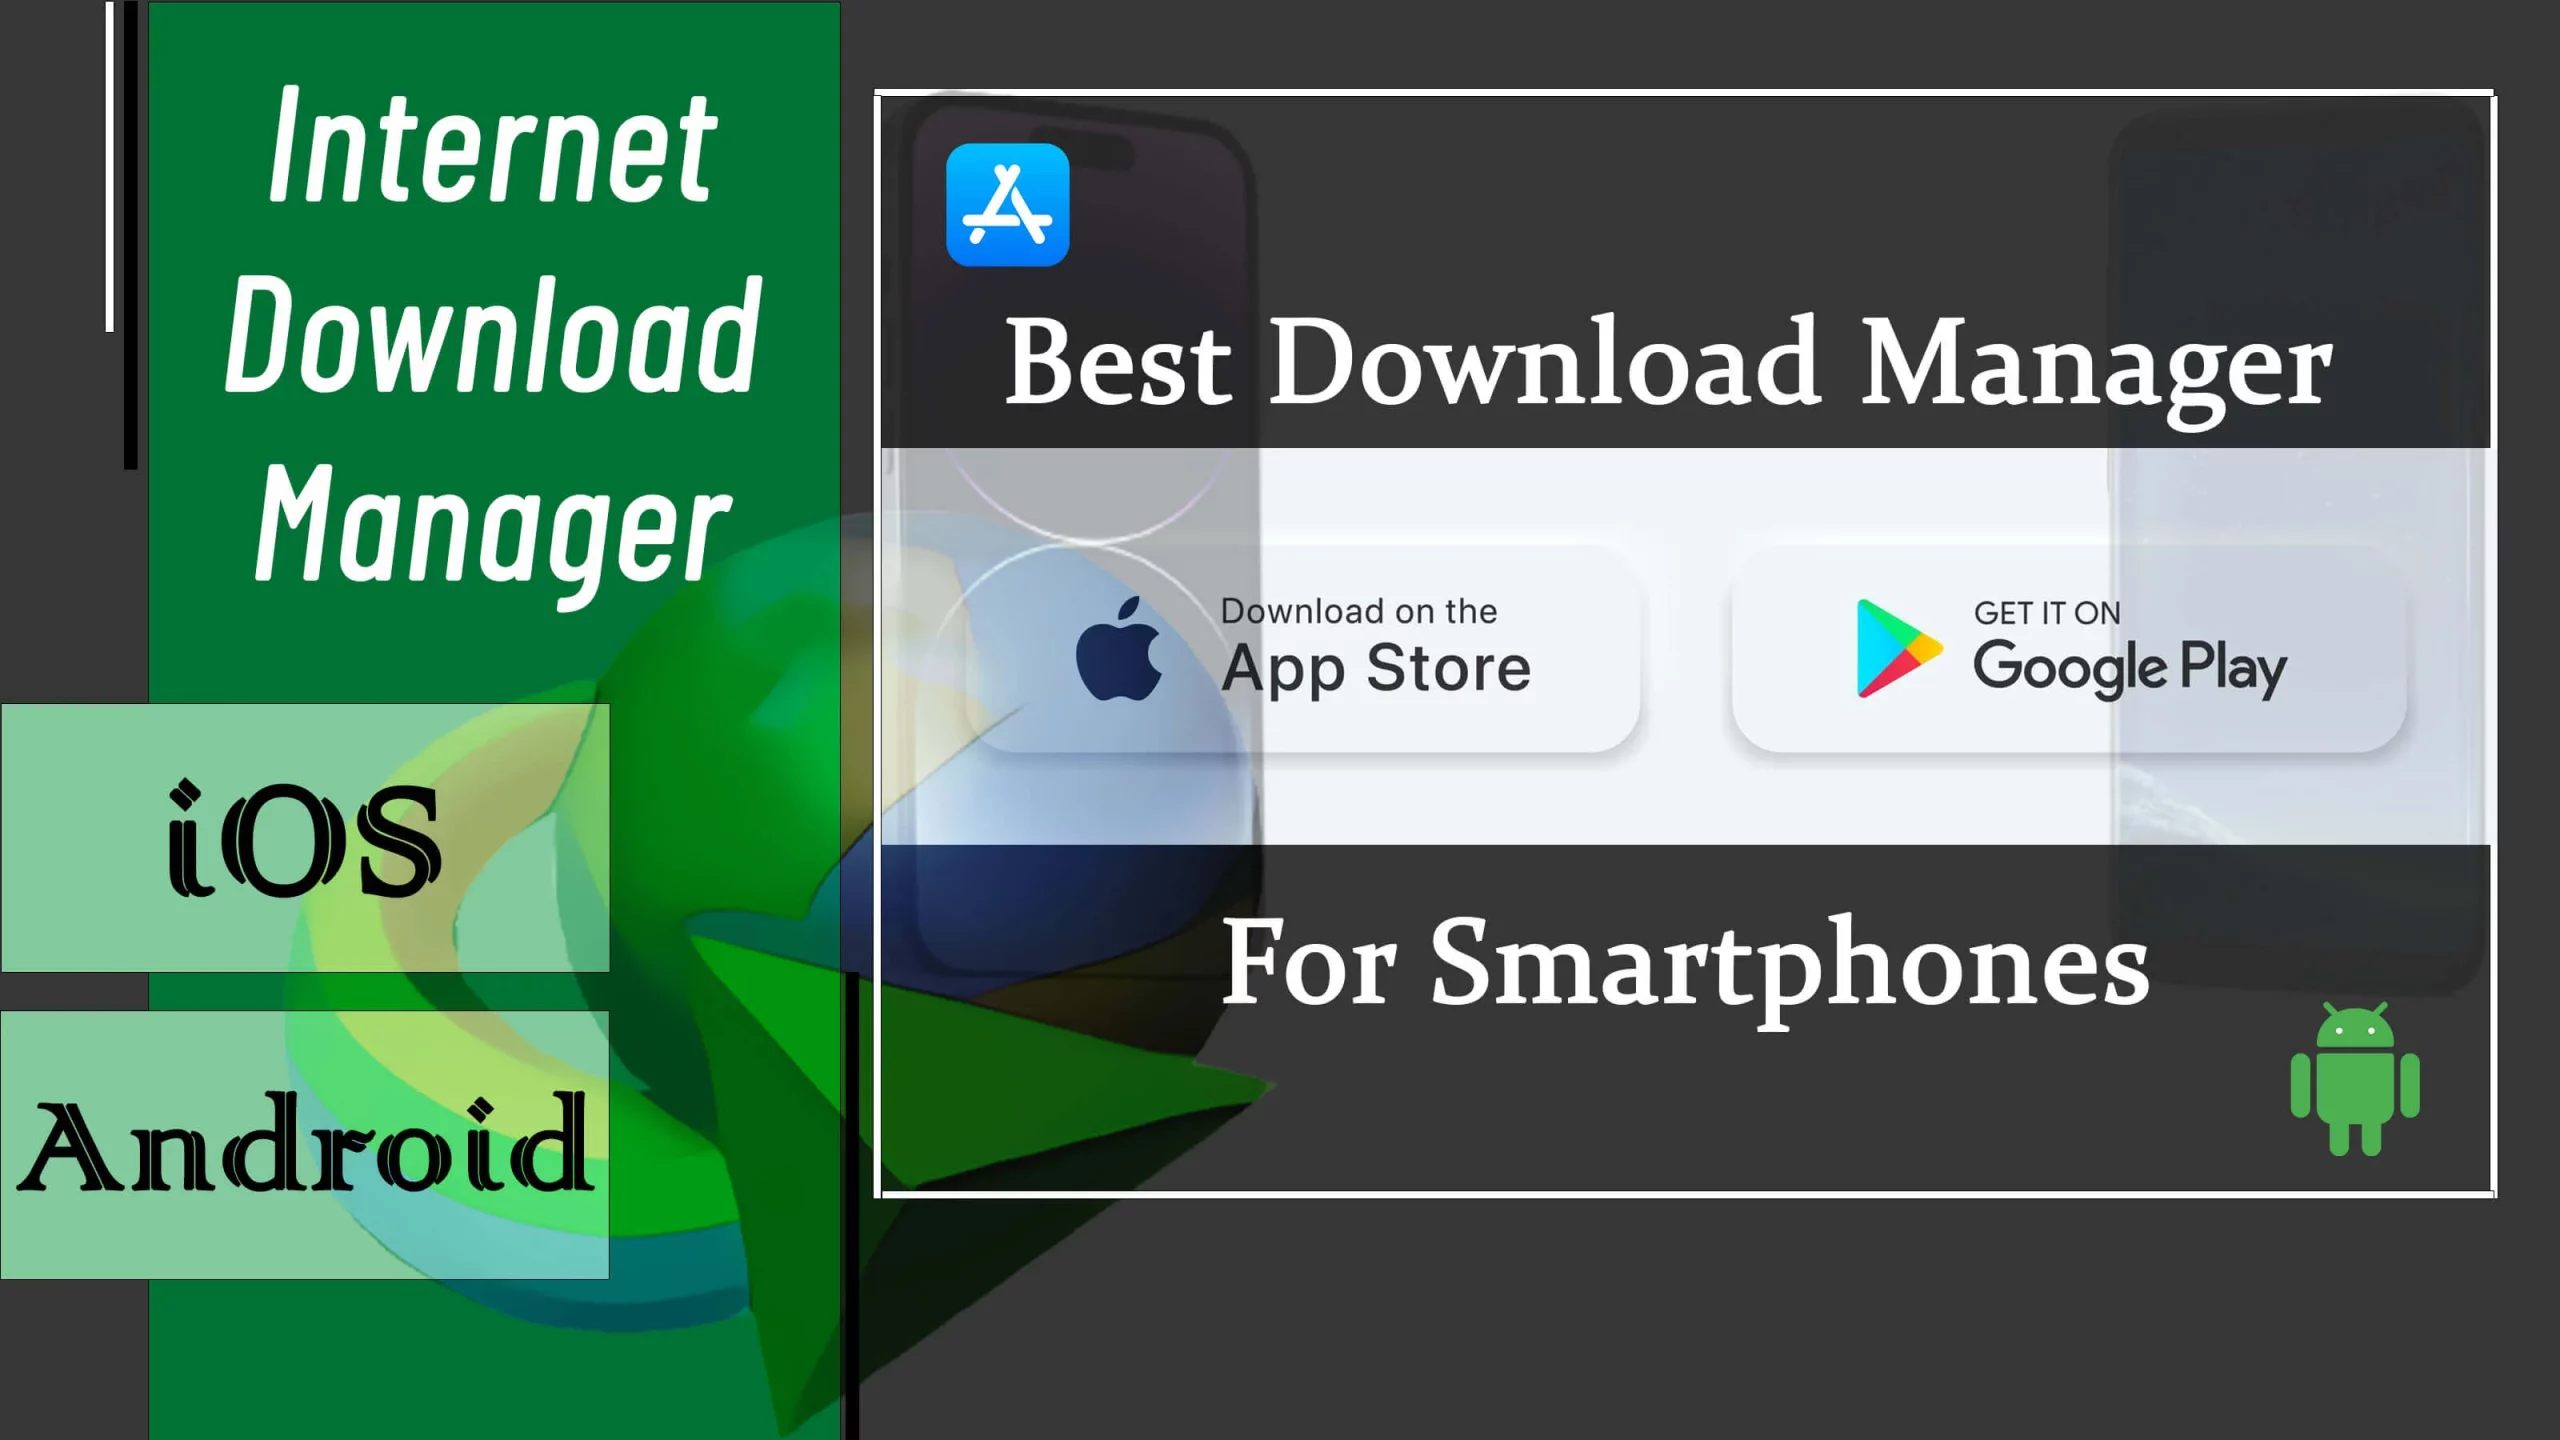 IDM for Android: What Is the Best Download Manager for Smartphones?